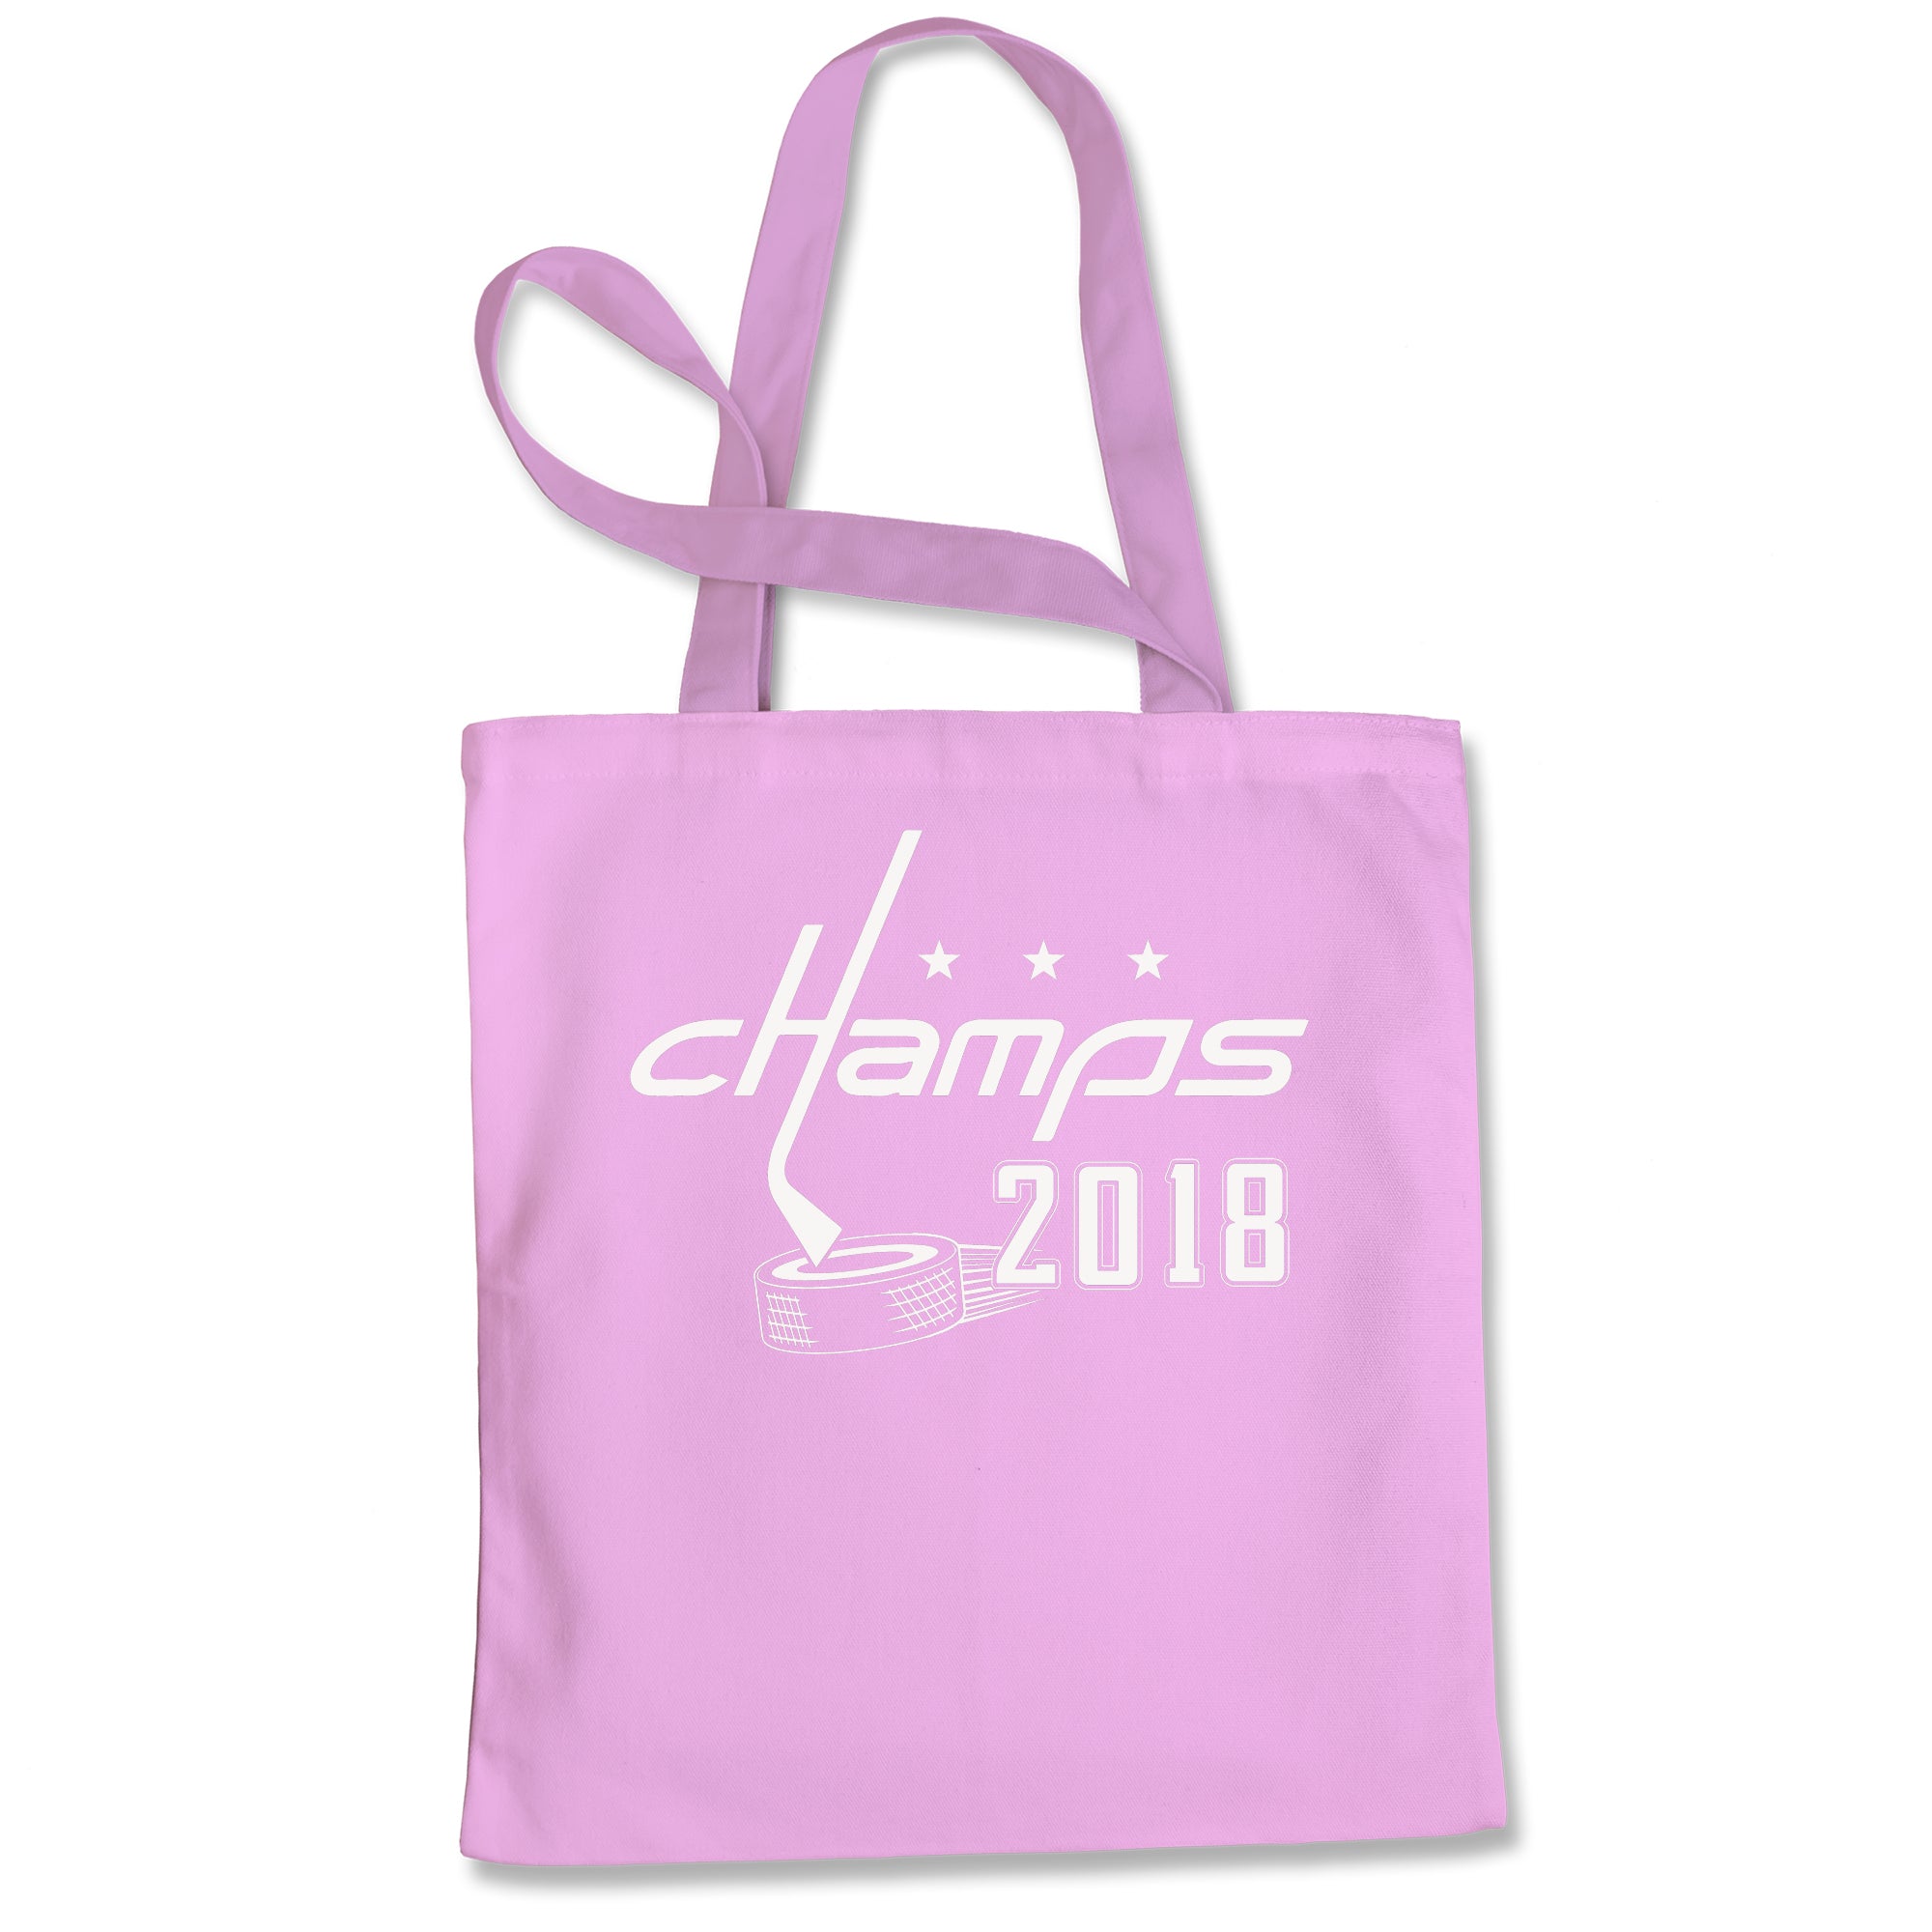 Allcaps Hockey 2018 Champs All Caps #Allcaps Cup Tote Bag